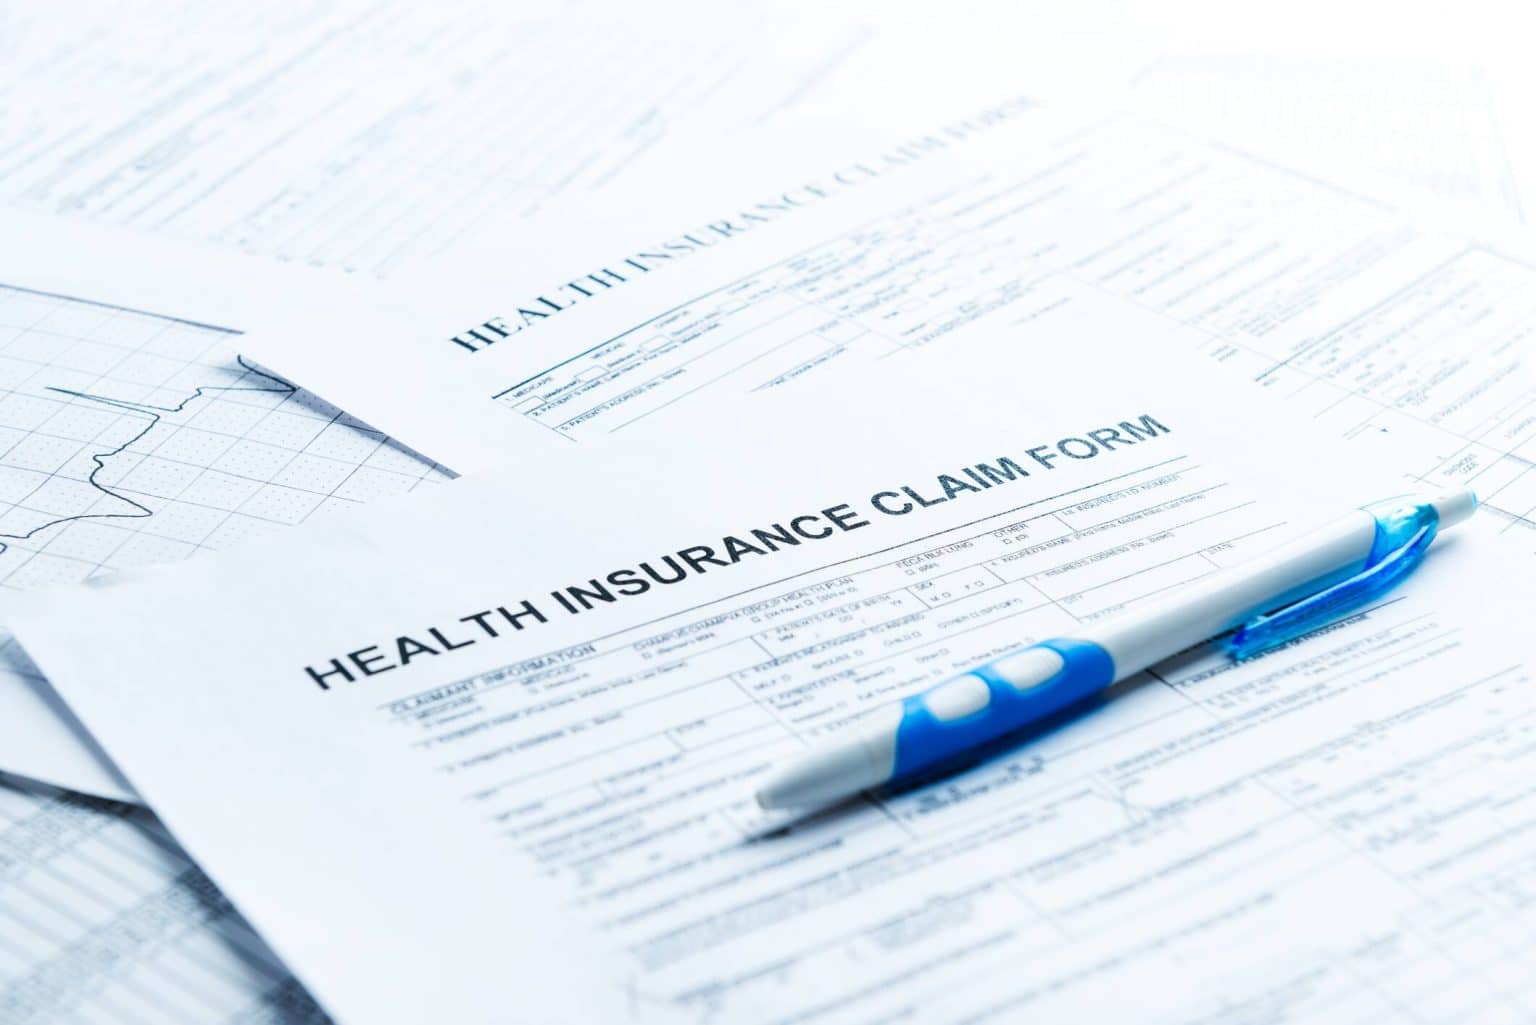 Health insurance claim form with pen on top.